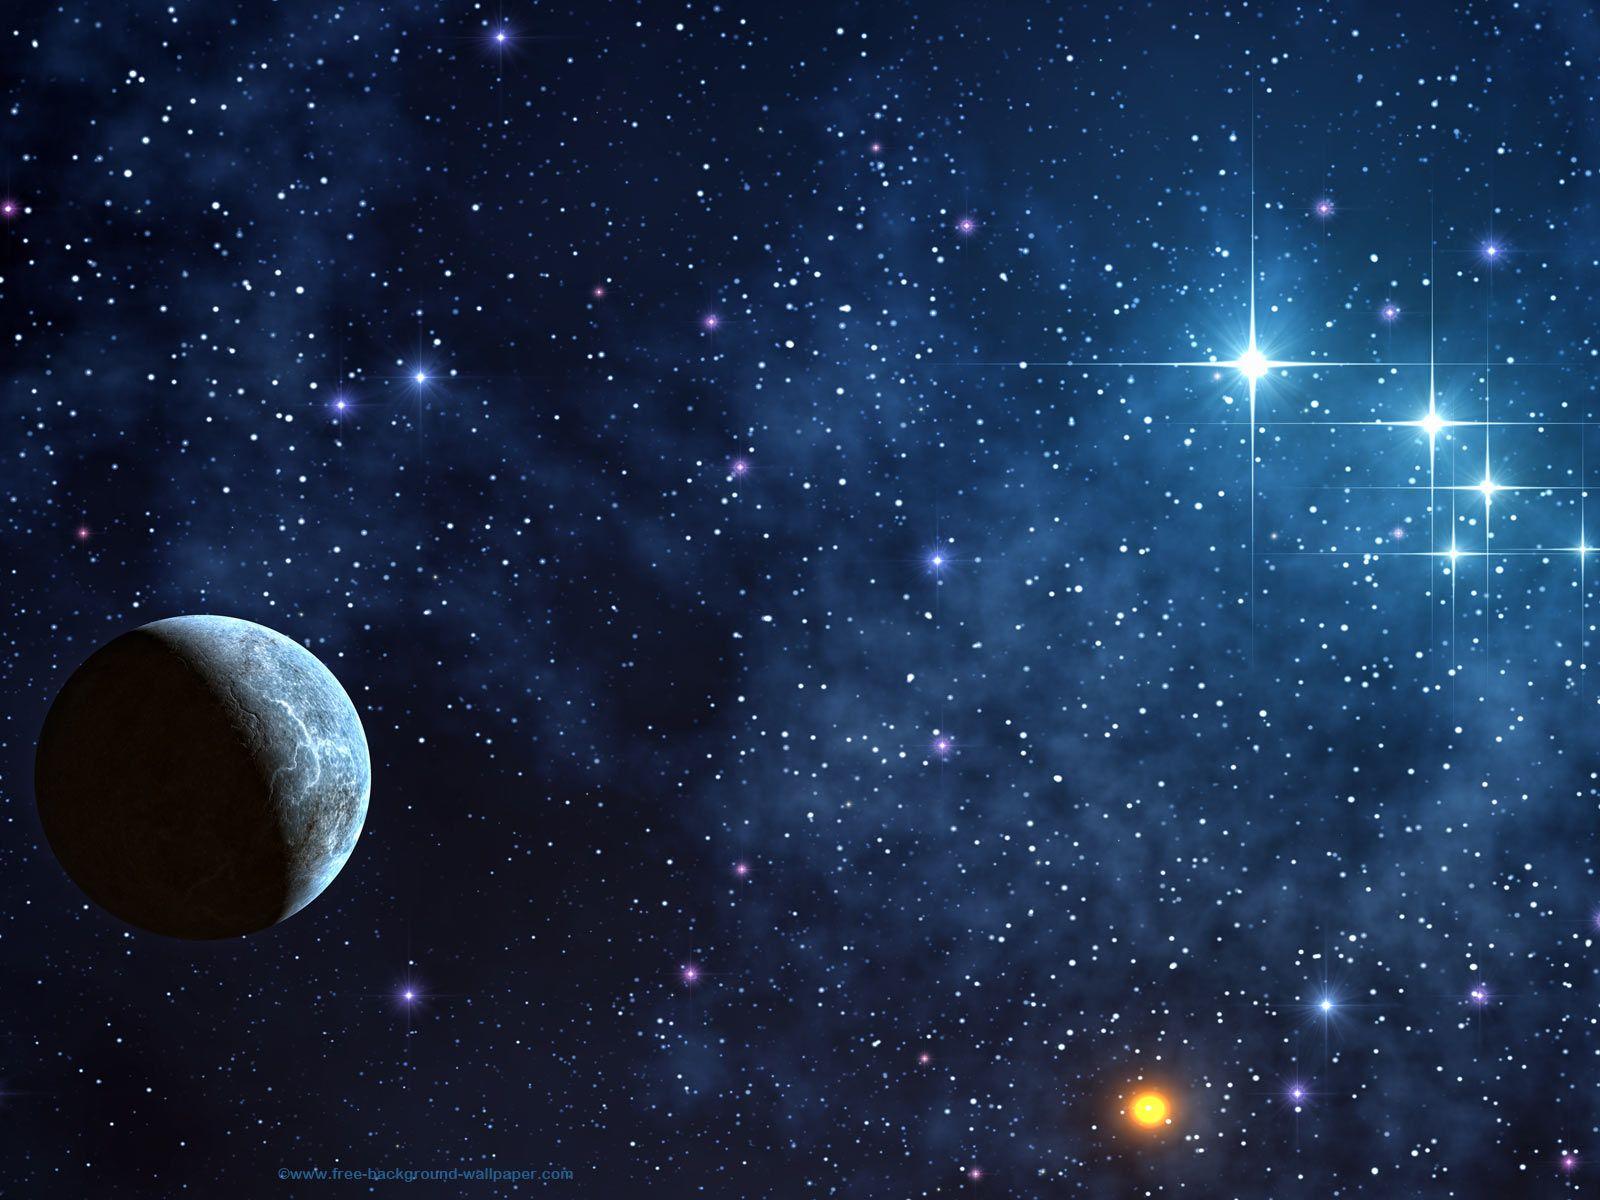 Free space background of bright shinning stars against a deep blue